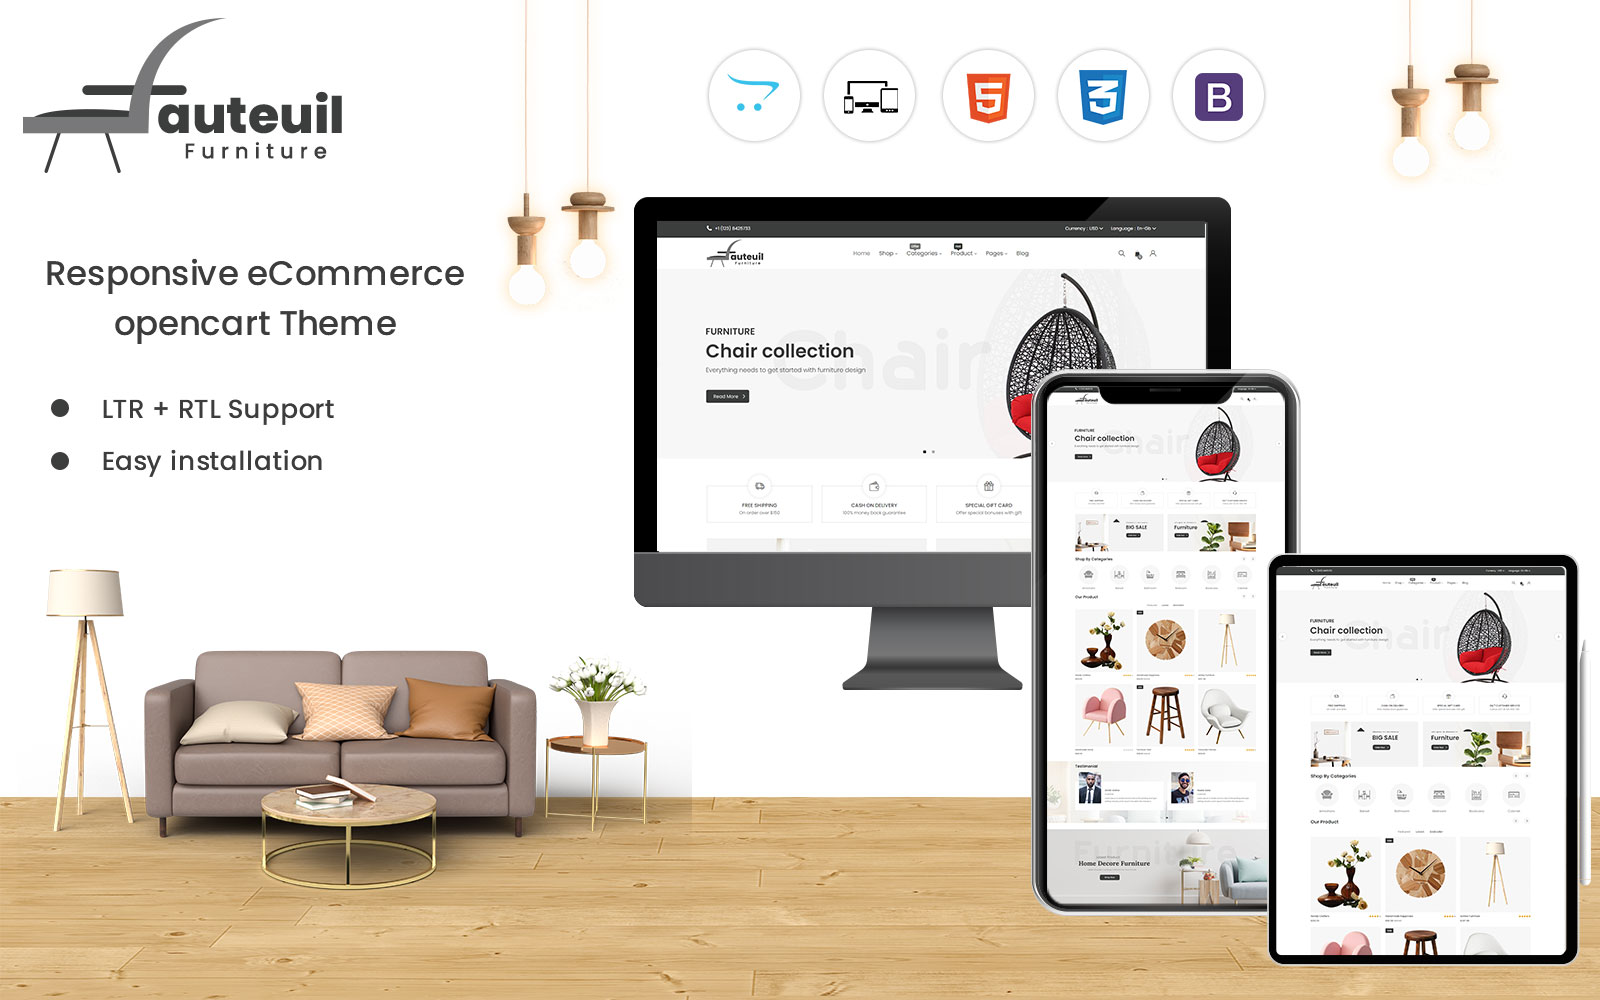 Fauteuil - A Creative Furniture and Decore Template for OpenCart